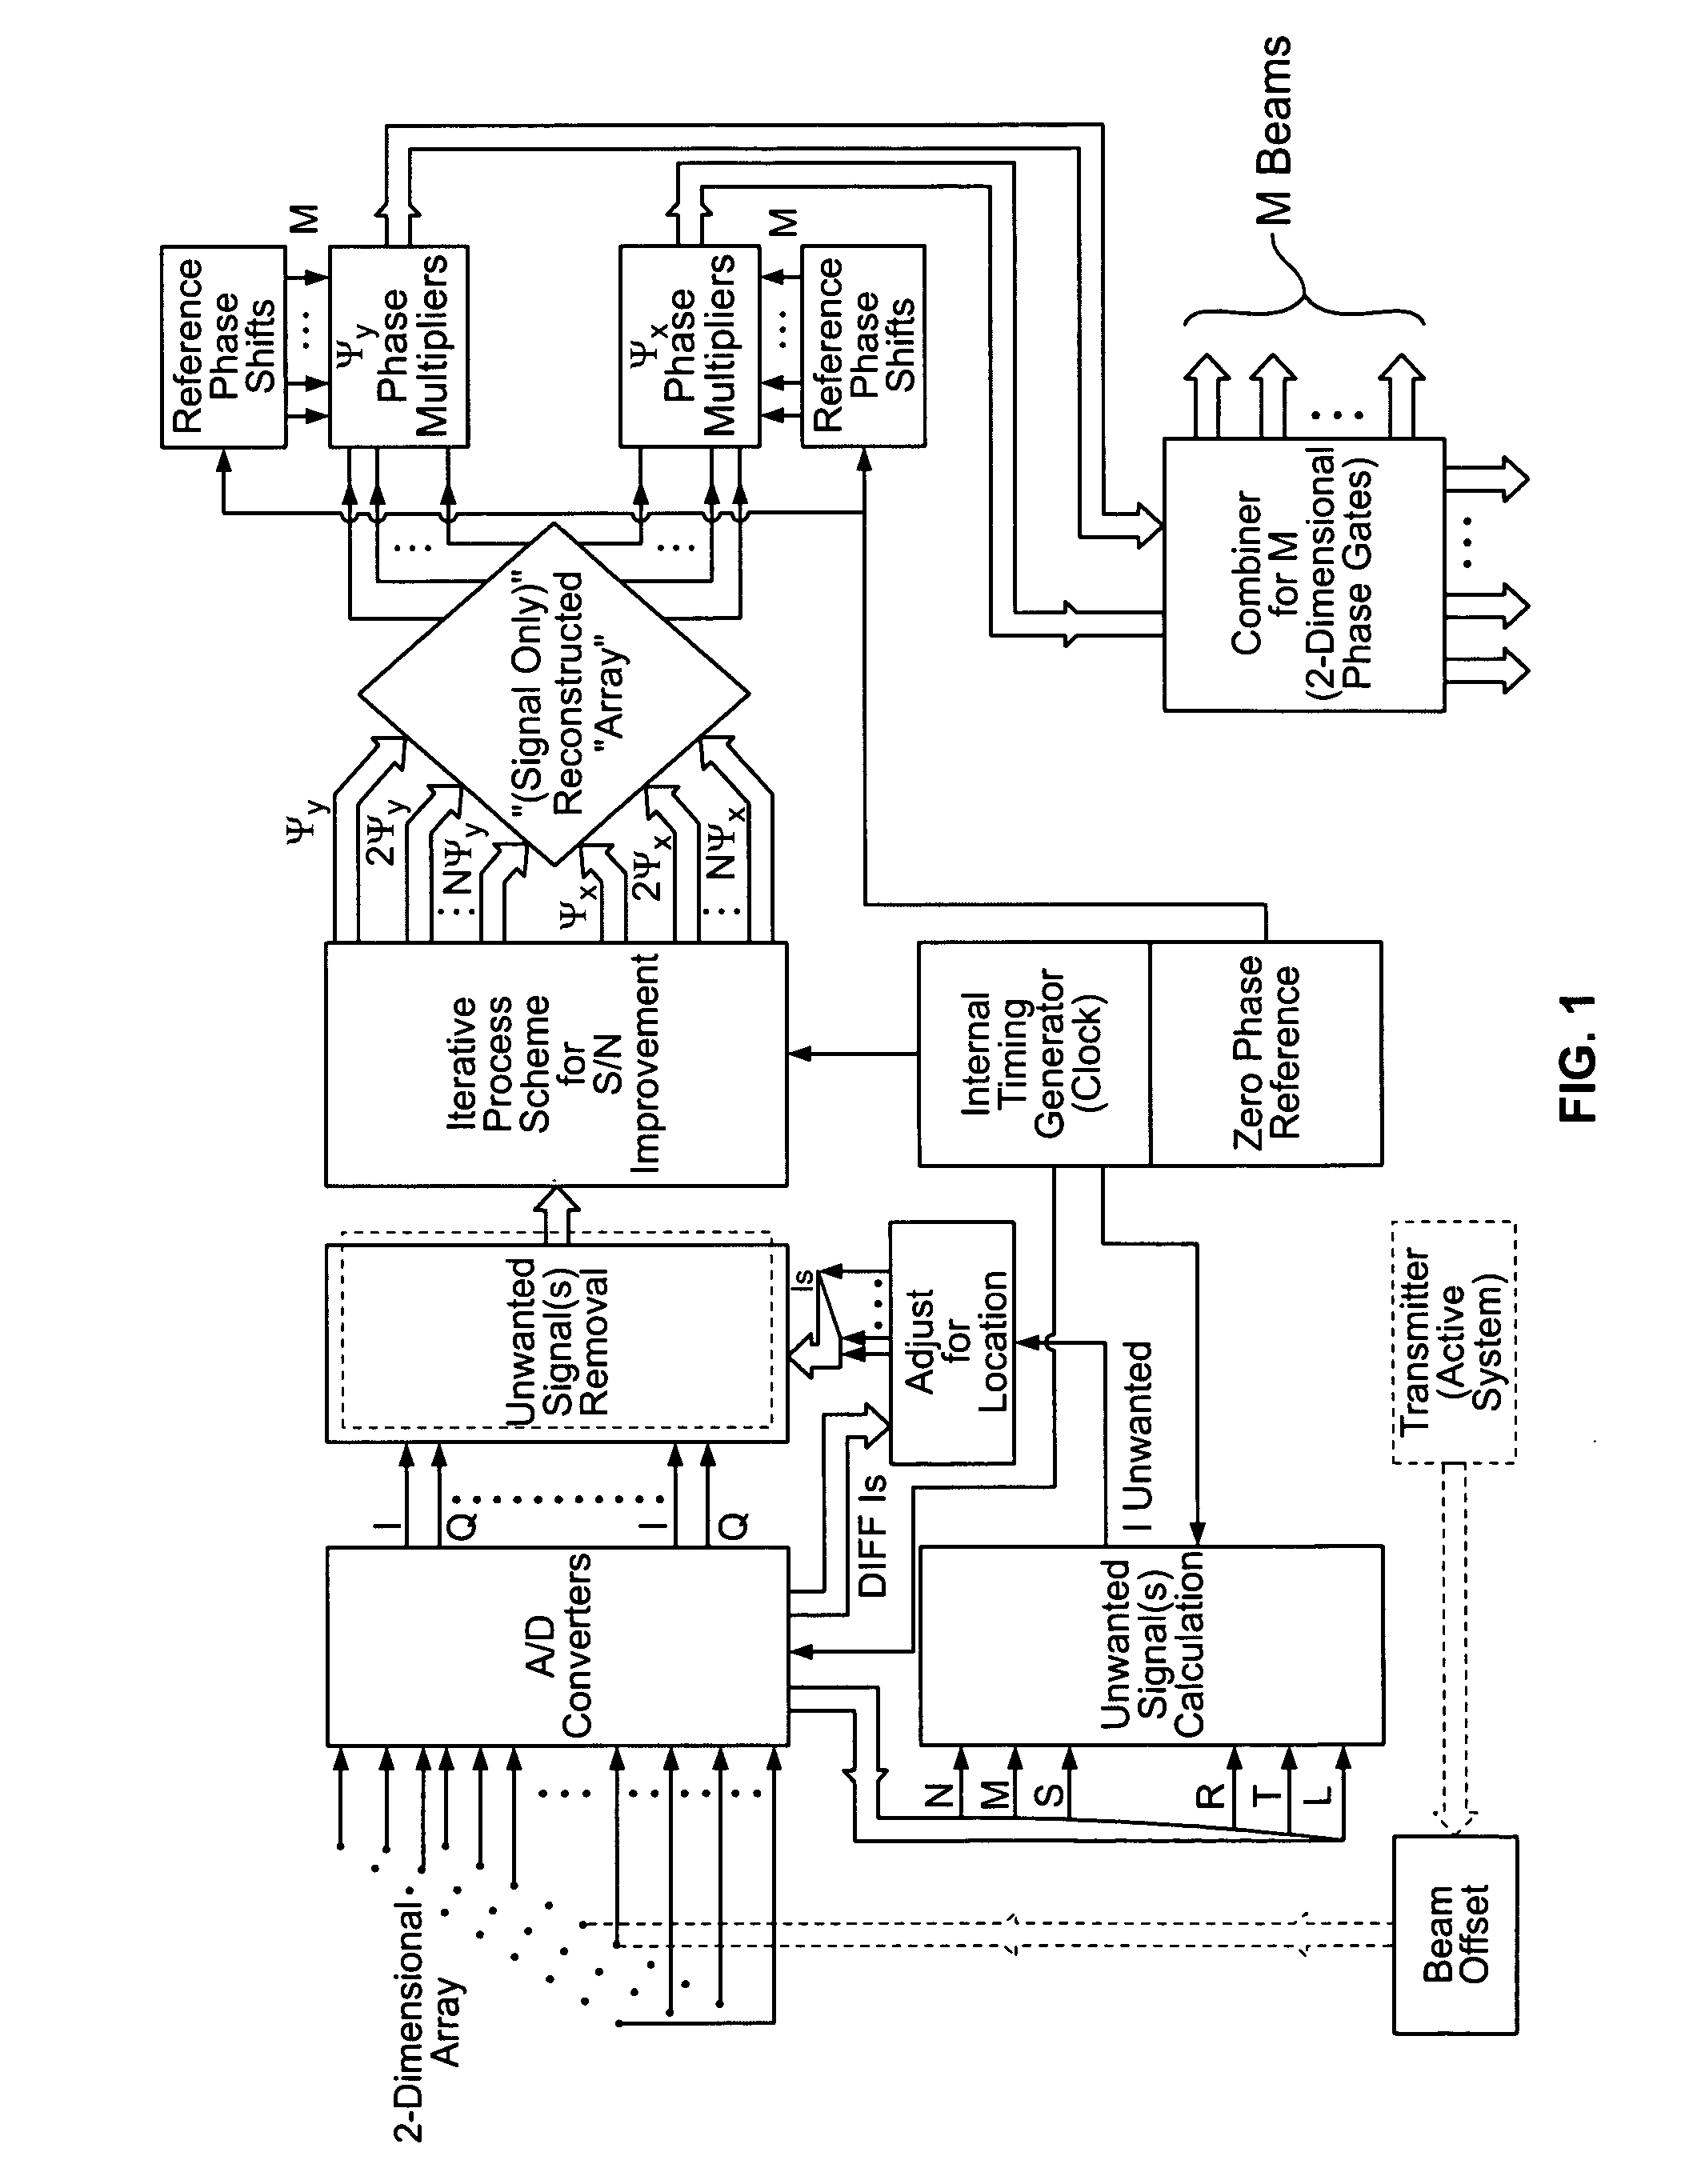 Processing architecture for a receiving system with improved directivity and signal to noise ratio